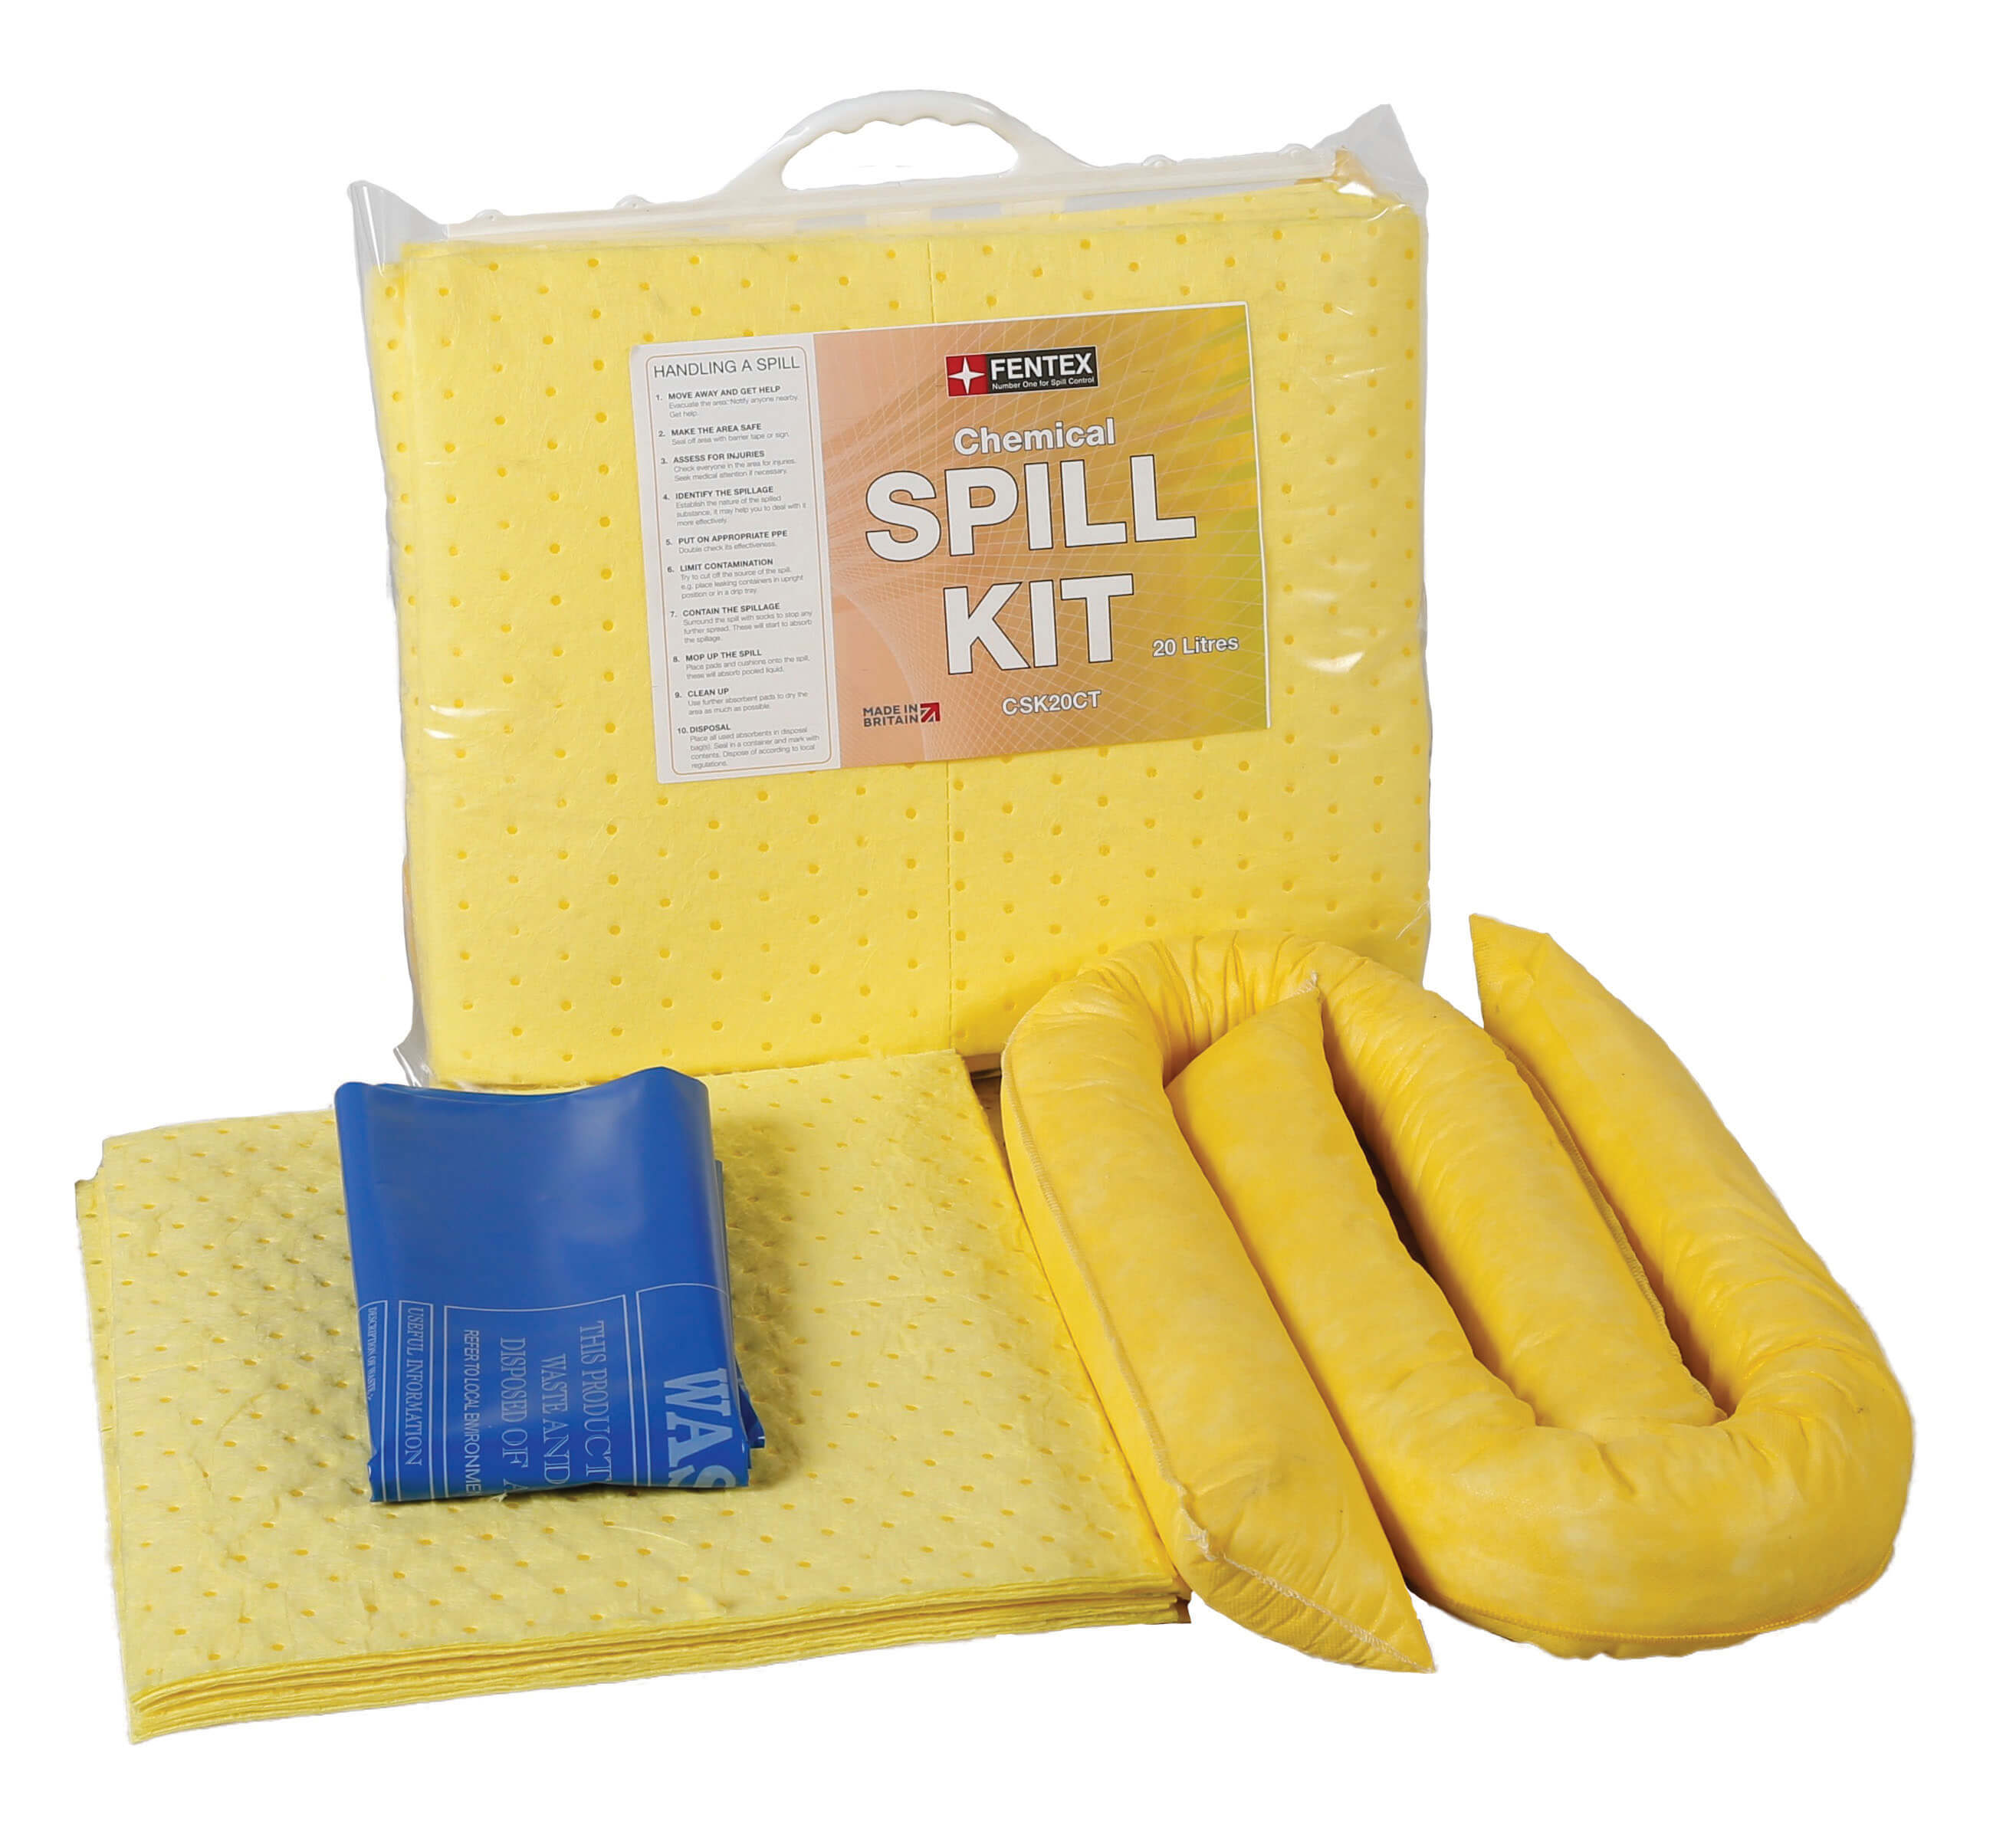 Chemical Spill Kit in Clip-top Bag